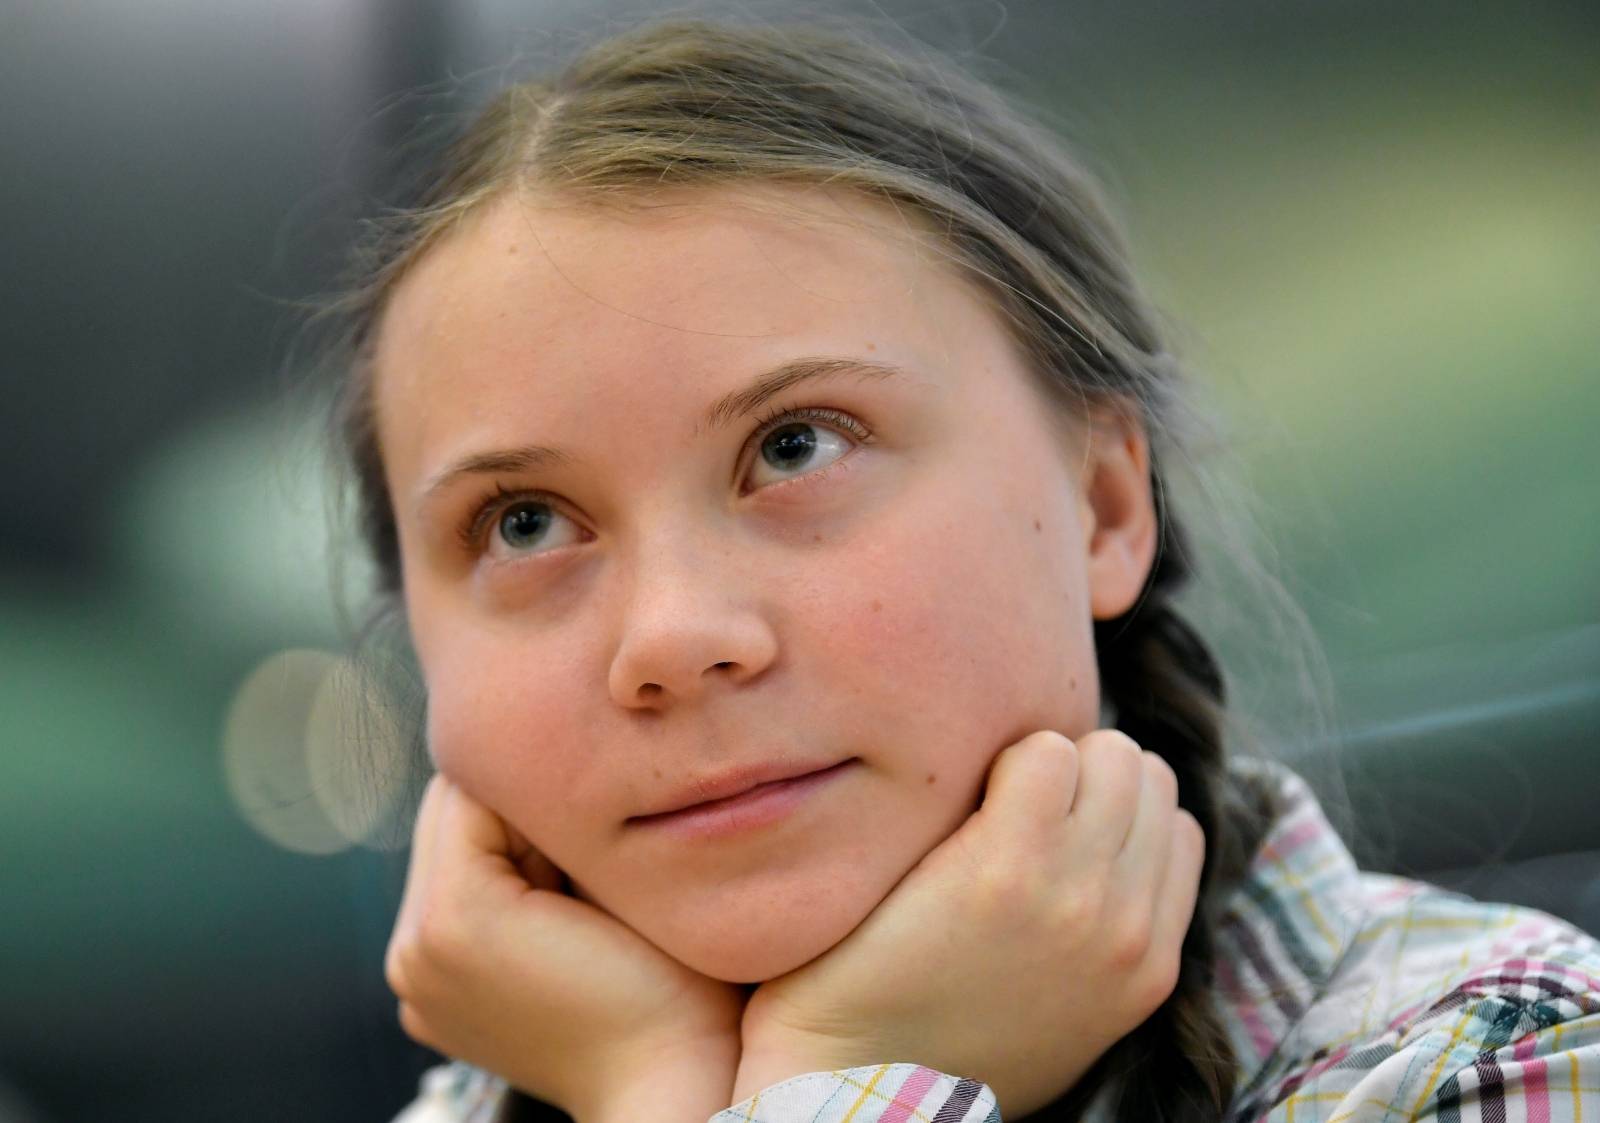 Teenage climate change activist Greta Thunberg gives speech at the House of Commons